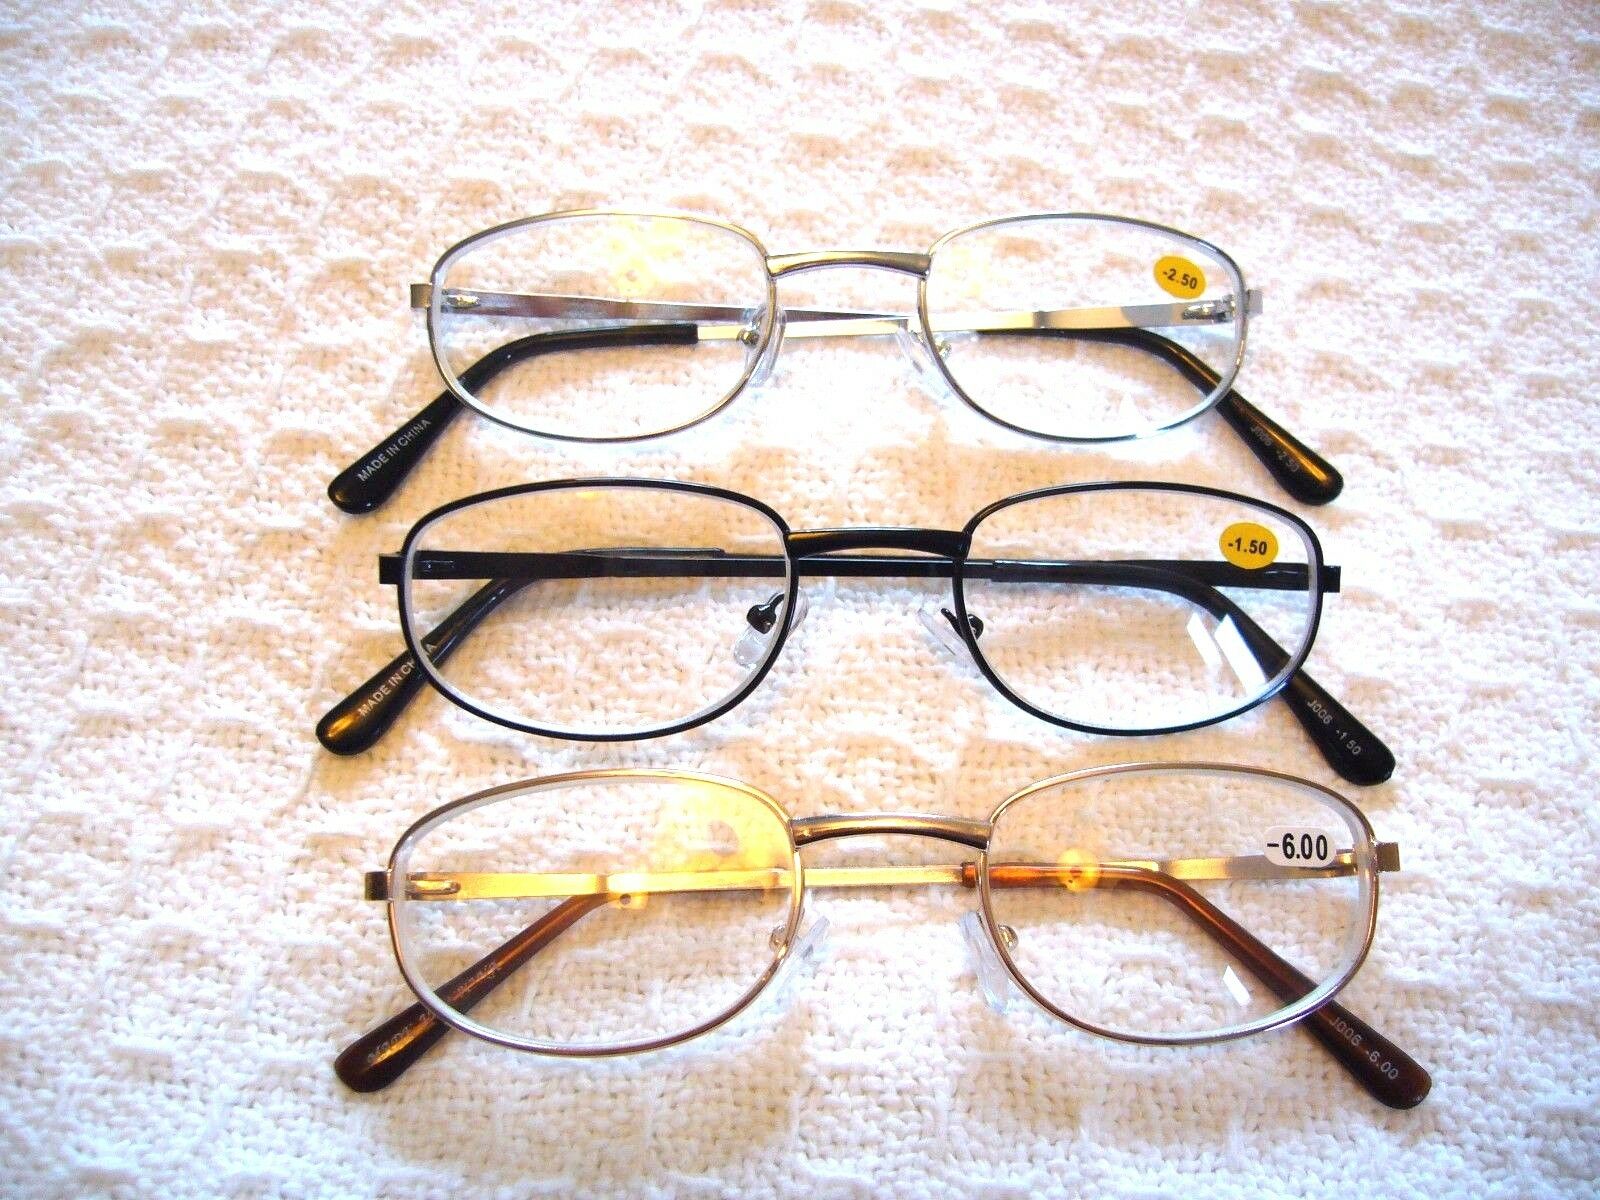 Nearsighted Distance Reading Glasses Minus Strength Myopia ~joo6~(-.50 To -6.00)